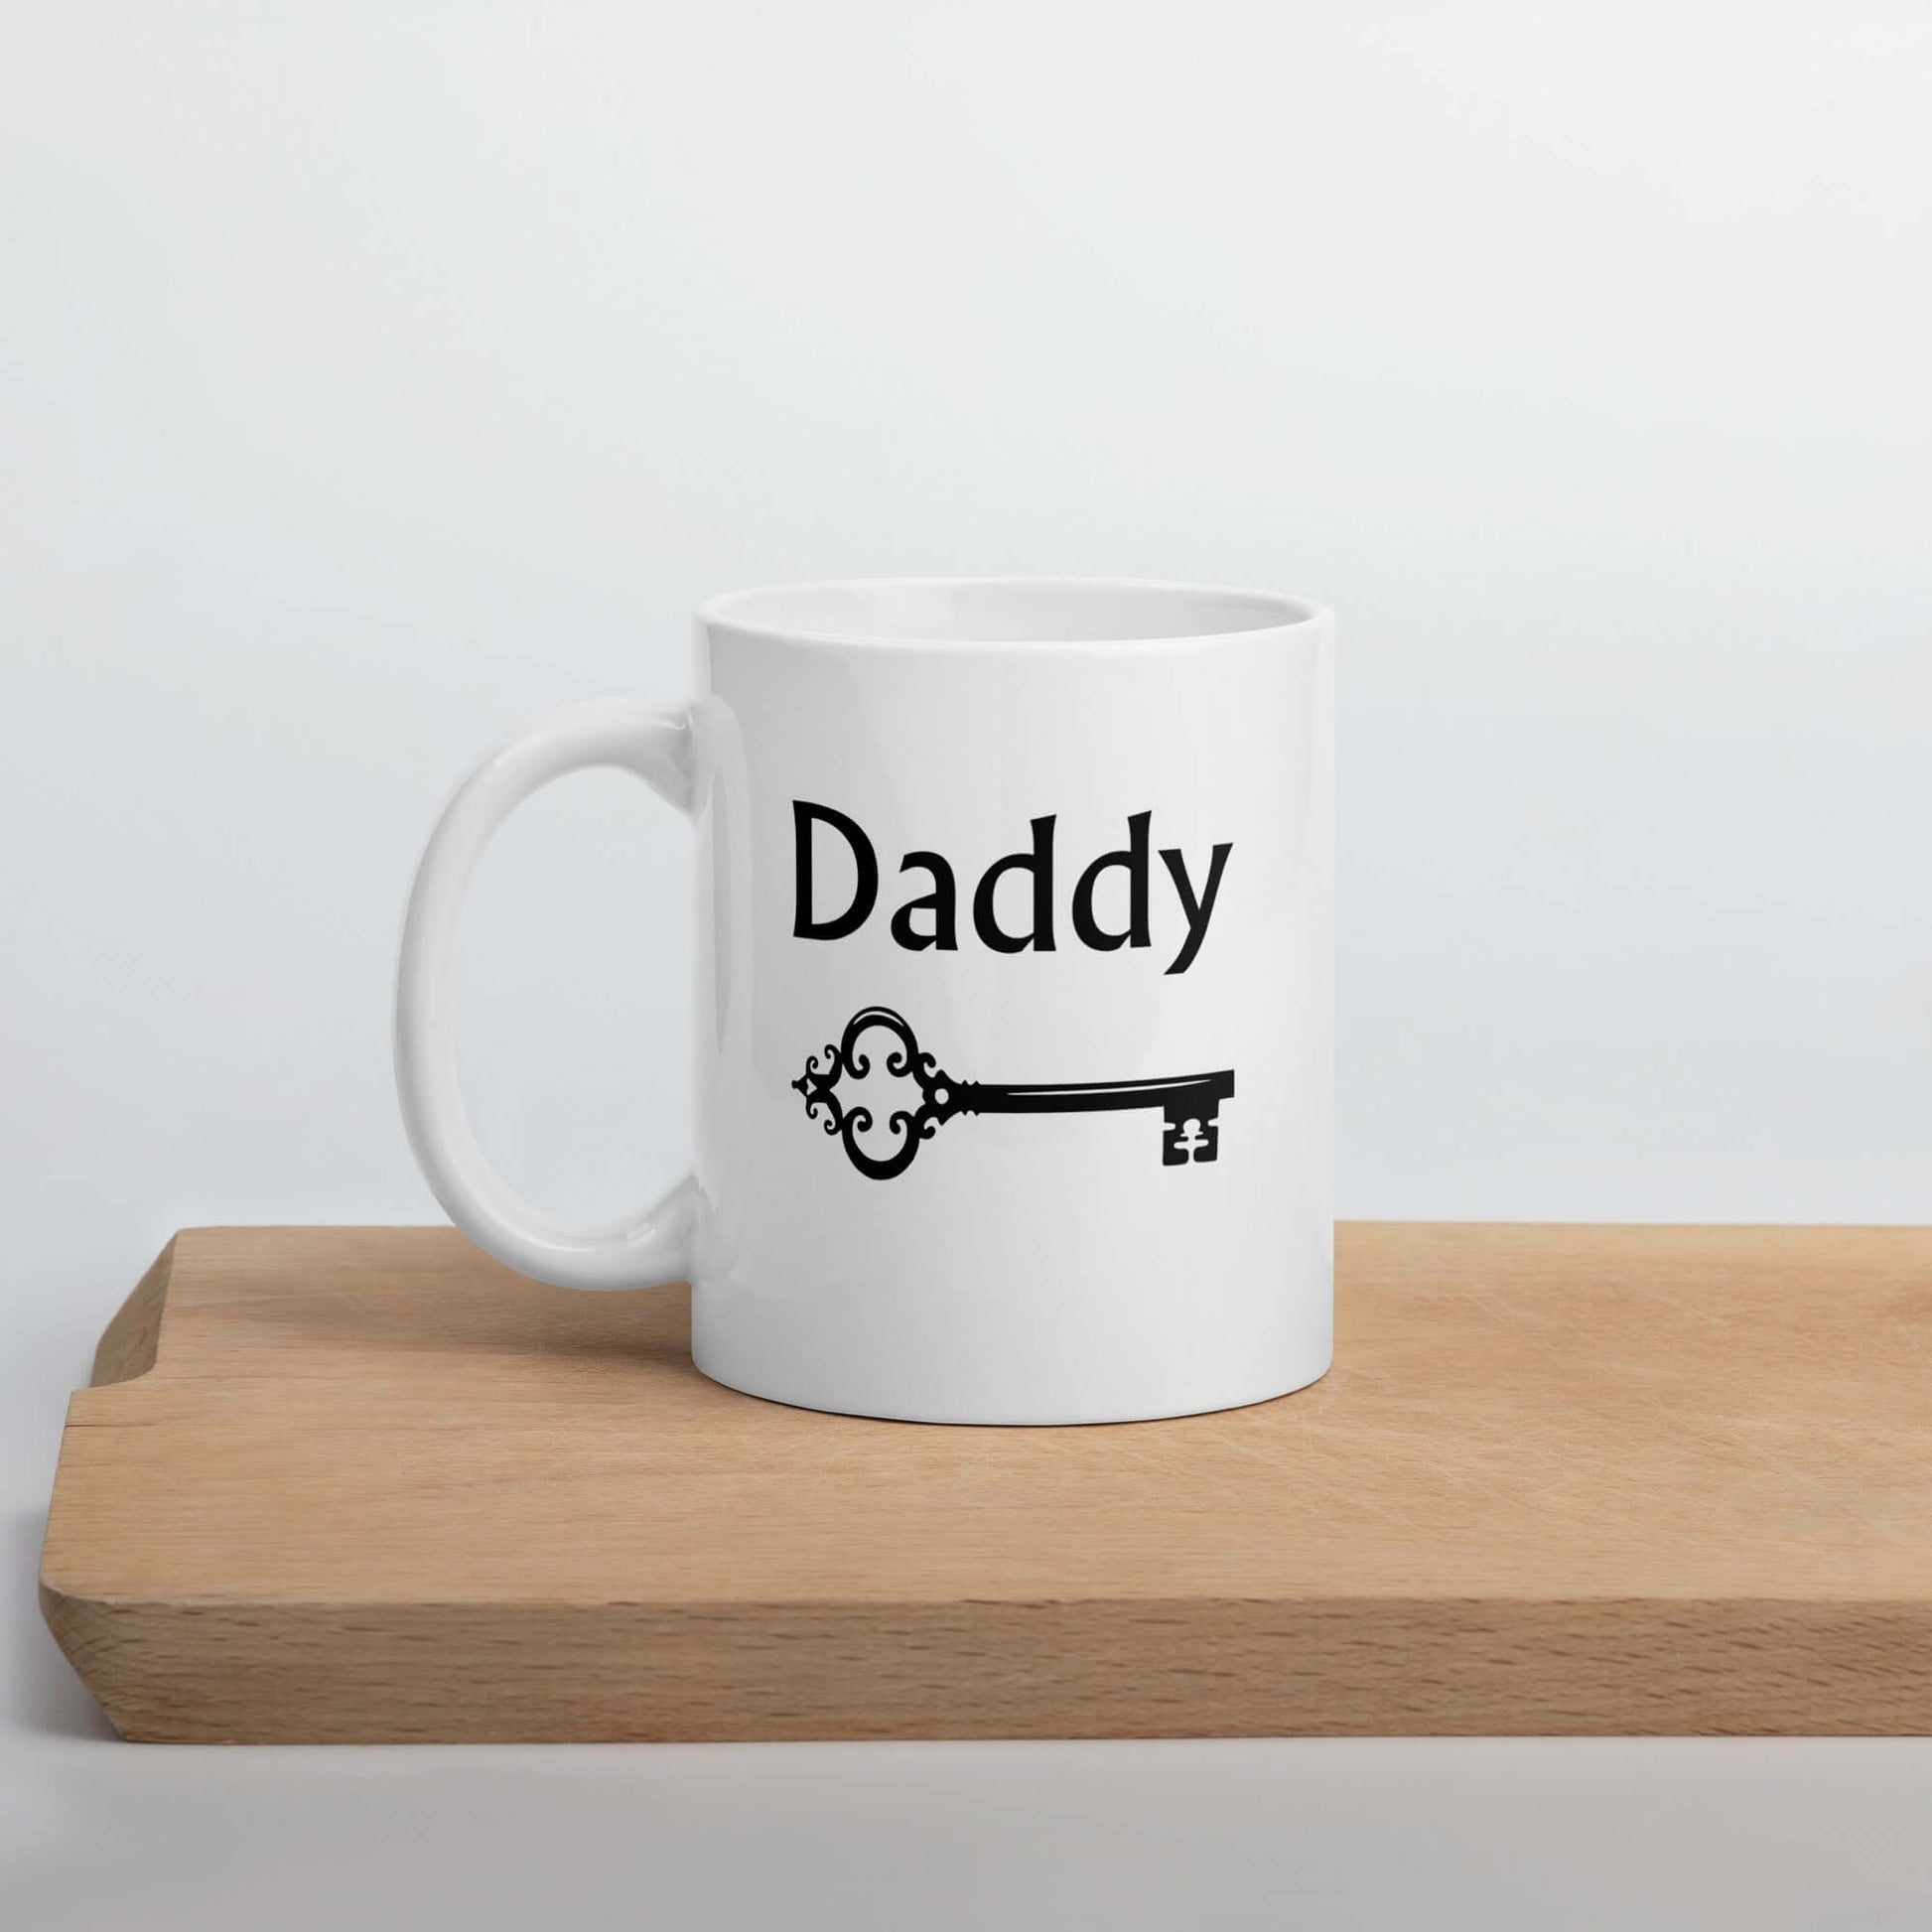 White ceramic coffee mug with an image of a BDSM key and the word Daddy printed on both sides of the mug.